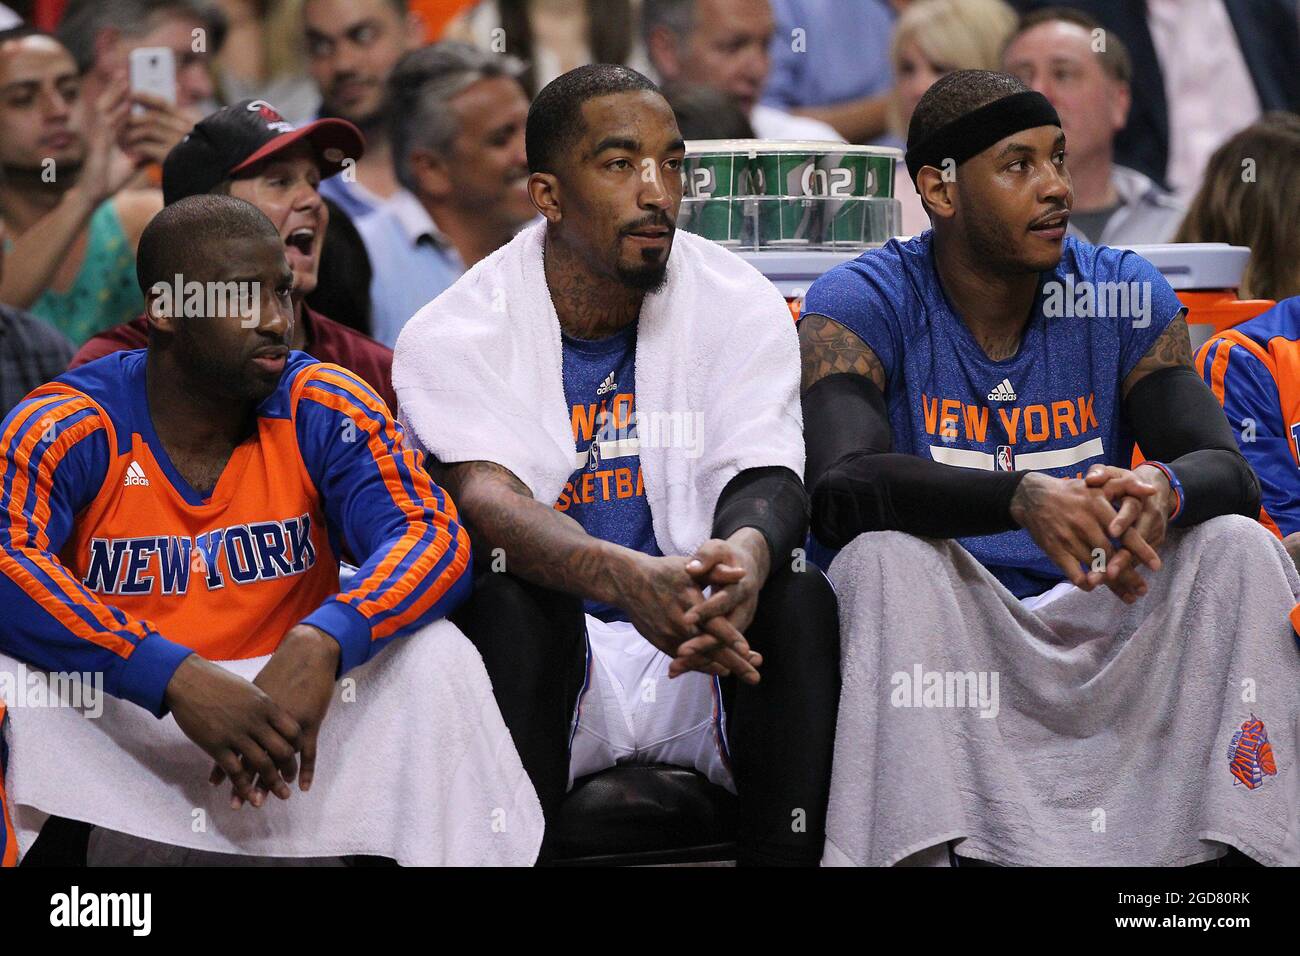 Miami, USA. 27th Feb, 2014. New York Knicks, from left, Raymond Felton, J.R. Smith, and Carmelo Anthony during the second quarter against the Miami Heat at the AmericanAirlines Arena in Miami on Thursday, February 27, 2014. (Photo by David Santiago/El Nuevo Herald/TNS/Sipa USA) Credit: Sipa USA/Alamy Live News Stock Photo